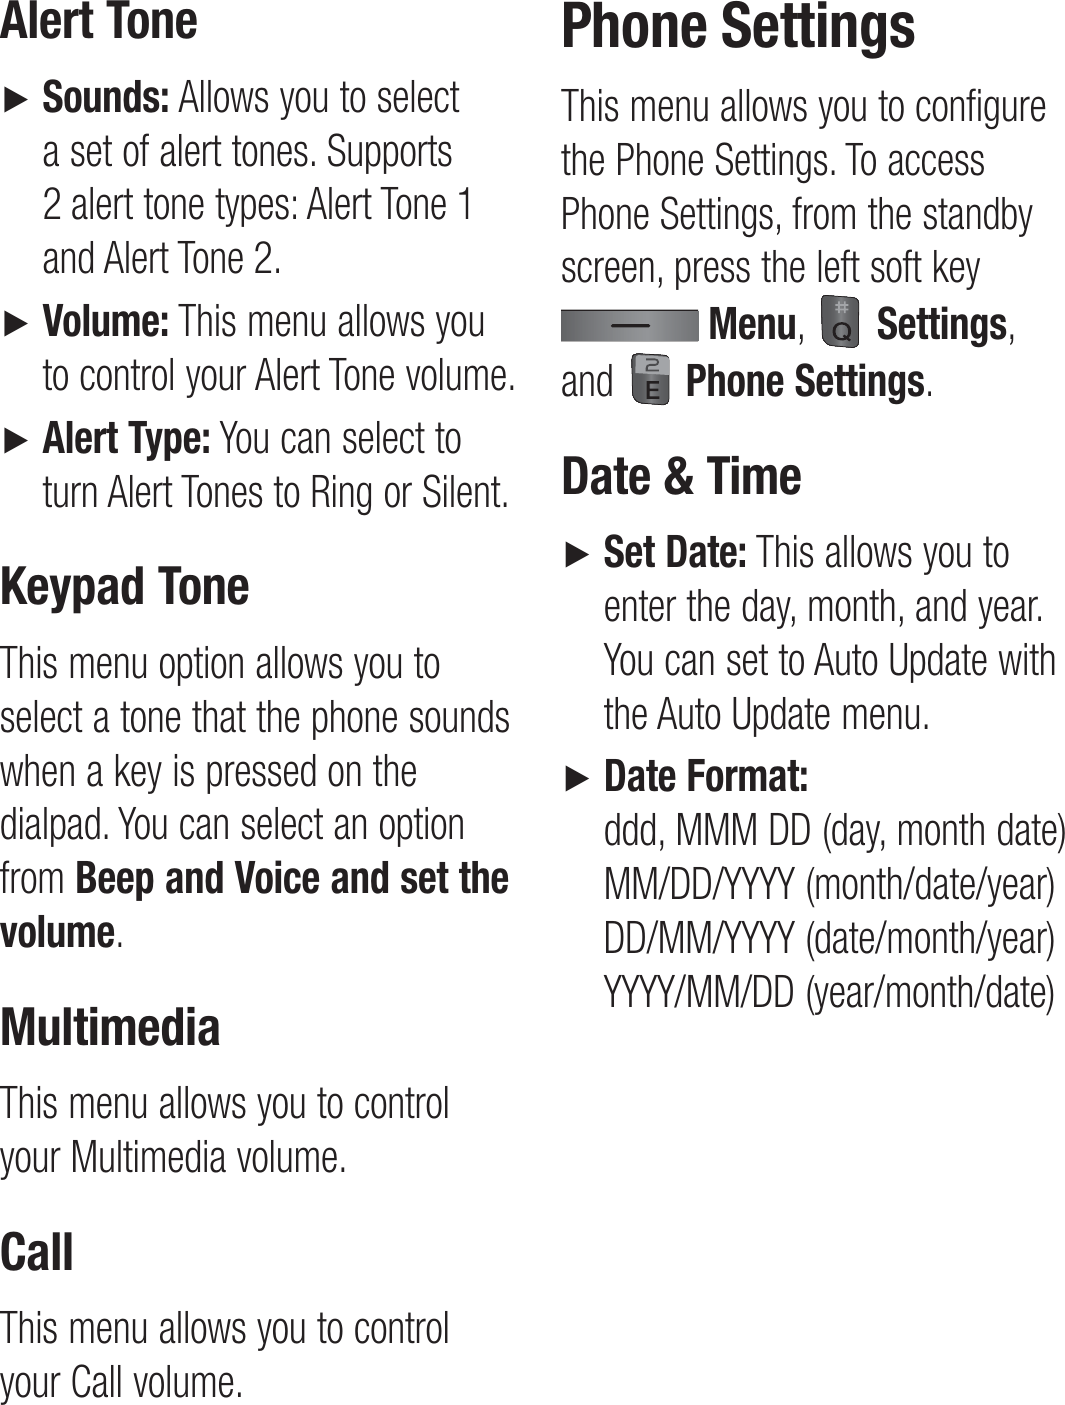 Alert Tone►    Sounds: Allows you to select a set of alert tones. Supports 2 alert tone types: Alert Tone 1 and Alert Tone 2.►   Volume: This menu allows you to control your Alert Tone volume.►   Alert Type: You can select to turn Alert Tones to Ring or Silent.Keypad ToneThis menu option allows you to select a tone that the phone sounds when a key is pressed on the dialpad. You can select an option from Beep and Voice and set the volume.MultimediaThis menu allows you to control your Multimedia volume.CallThis menu allows you to control your Call volume. Phone SettingsThis menu allows you to configure the Phone Settings. To access Phone Settings, from the standby screen, press the left soft key  Menu,   Settings, and   Phone Settings.Date &amp; Time►   Set Date: This allows you to enter the day, month, and year. You can set to Auto Update with the Auto Update menu.►   Date Format:  ddd, MMM DD (day, month date) MM/DD/YYYY (month/date/year)  DD/MM/YYYY (date/month/year) YYYY/MM/DD (year/month/date)